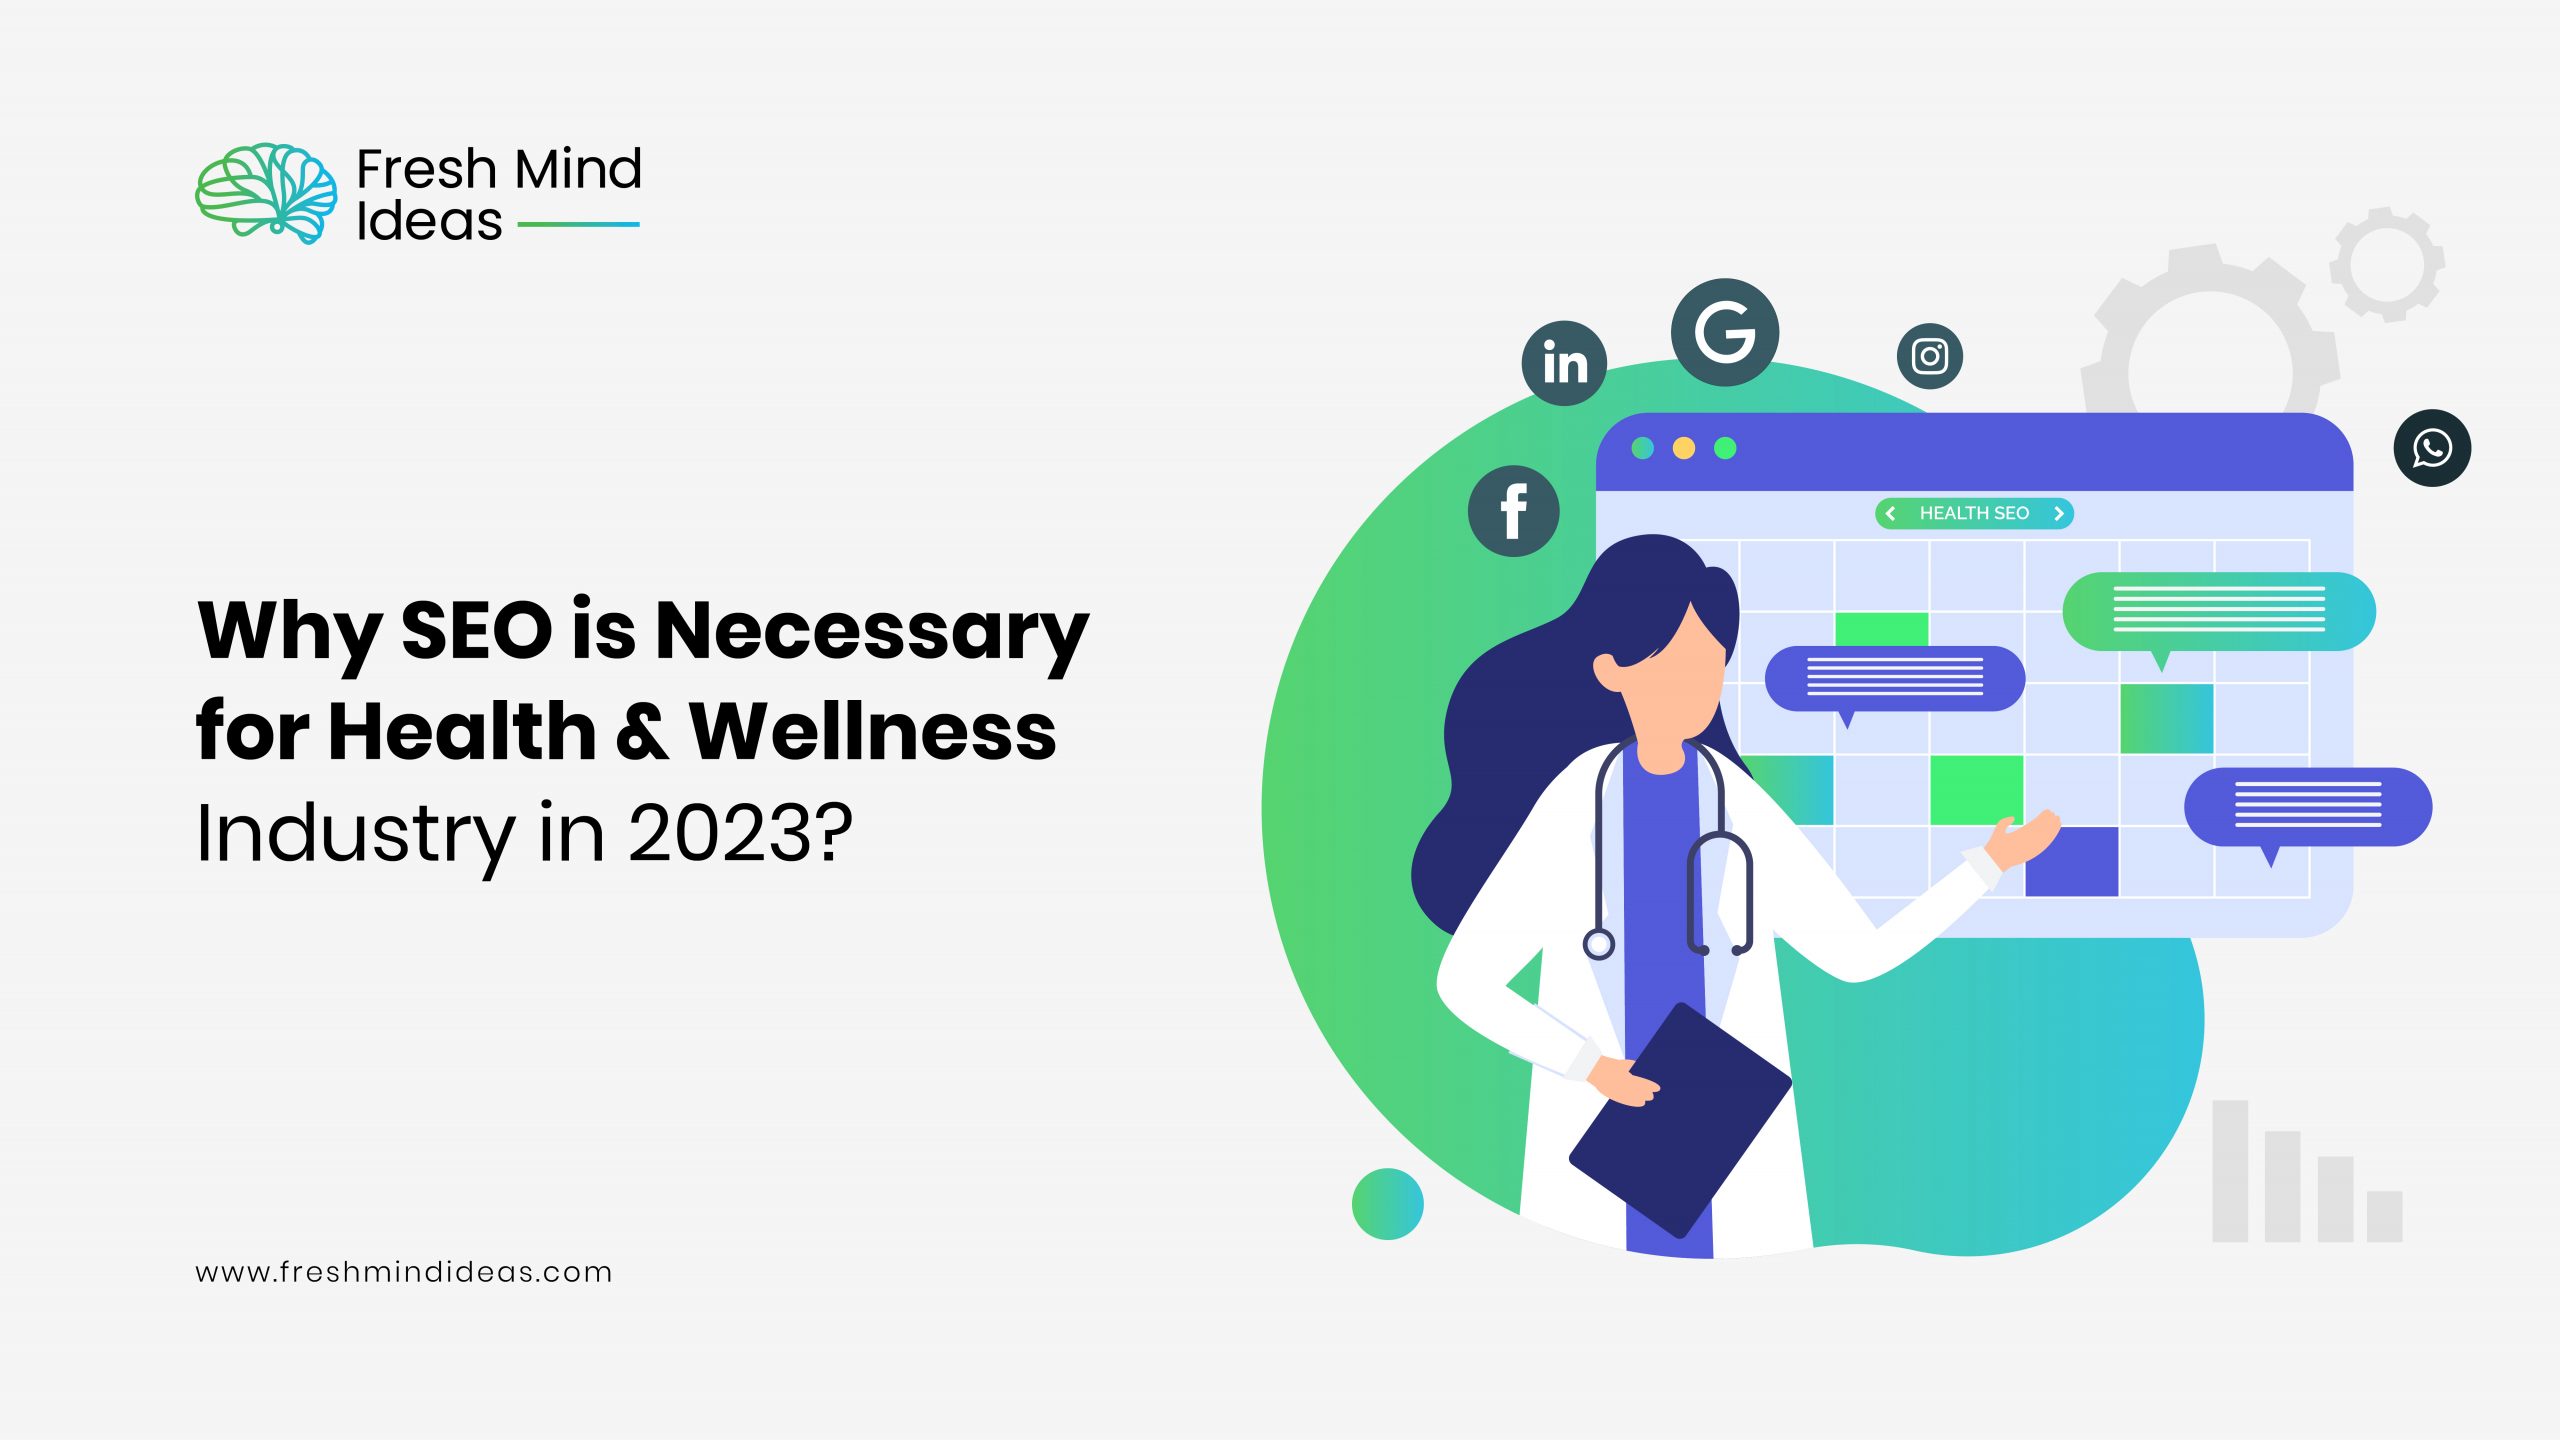 Why SEO is Necessary for Health & Wellness Industry in 2023?